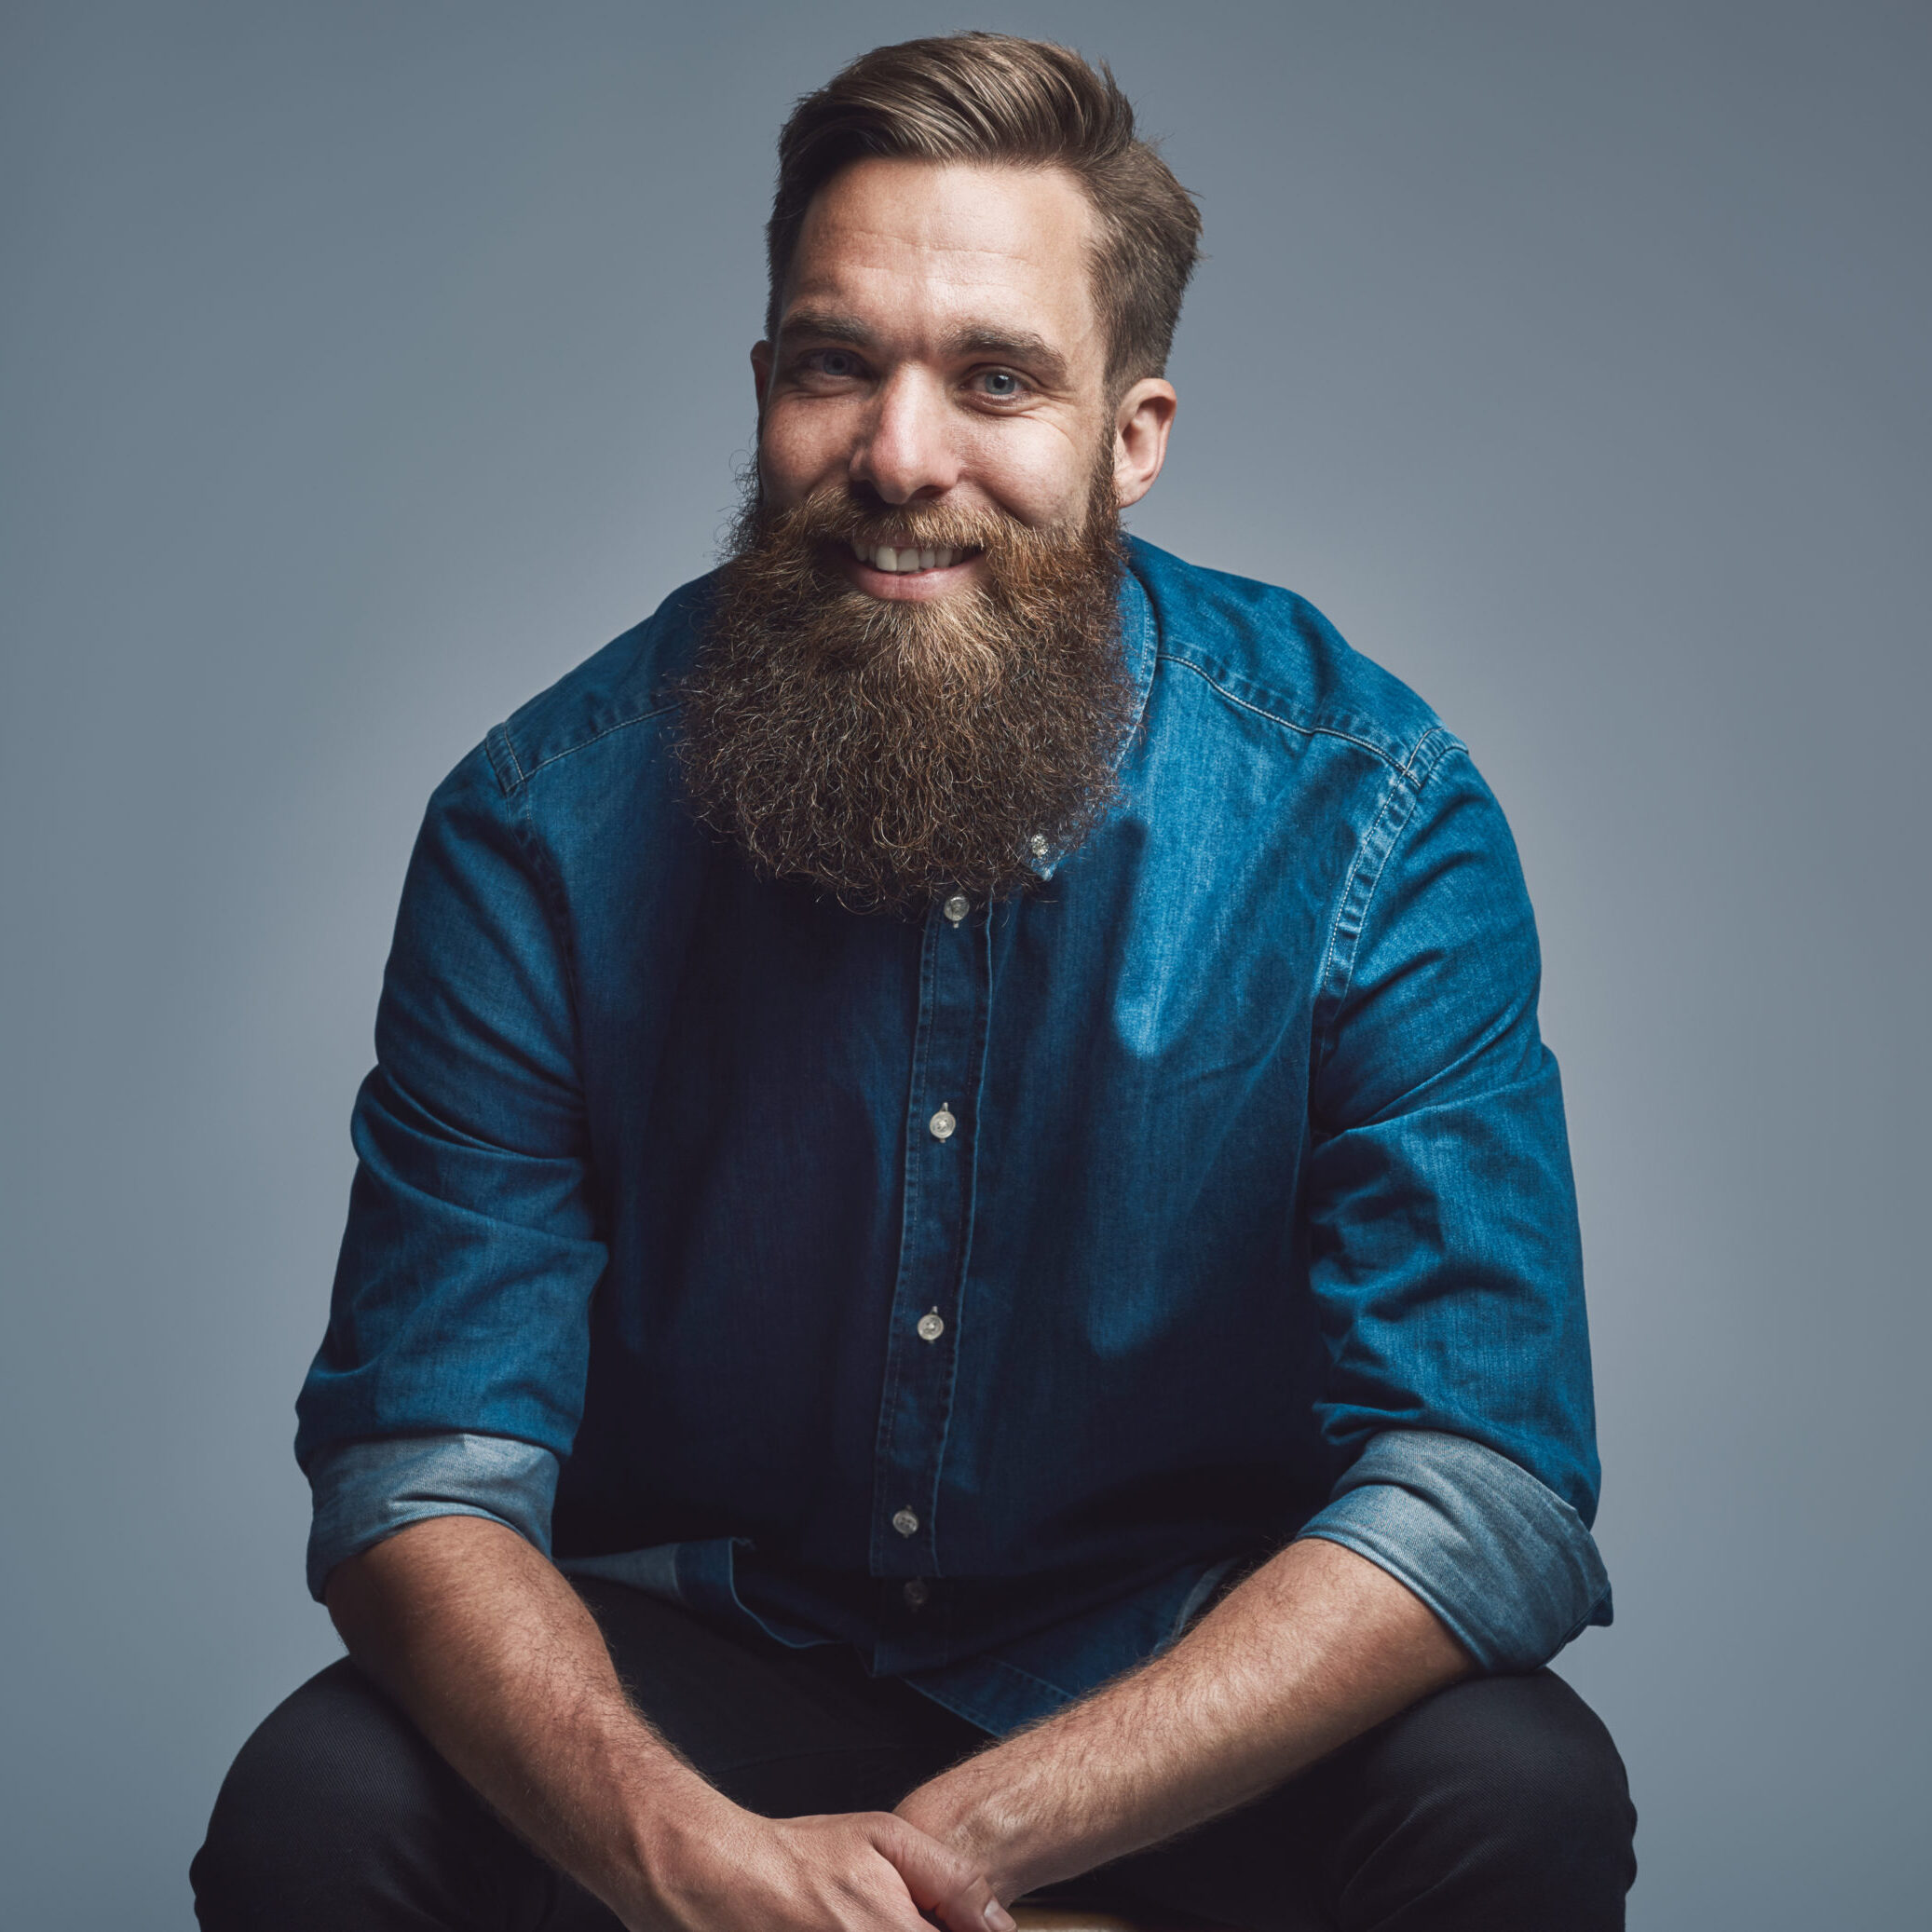 Single sitting young handsome smiling man in blue denim shirt and beard over gray background